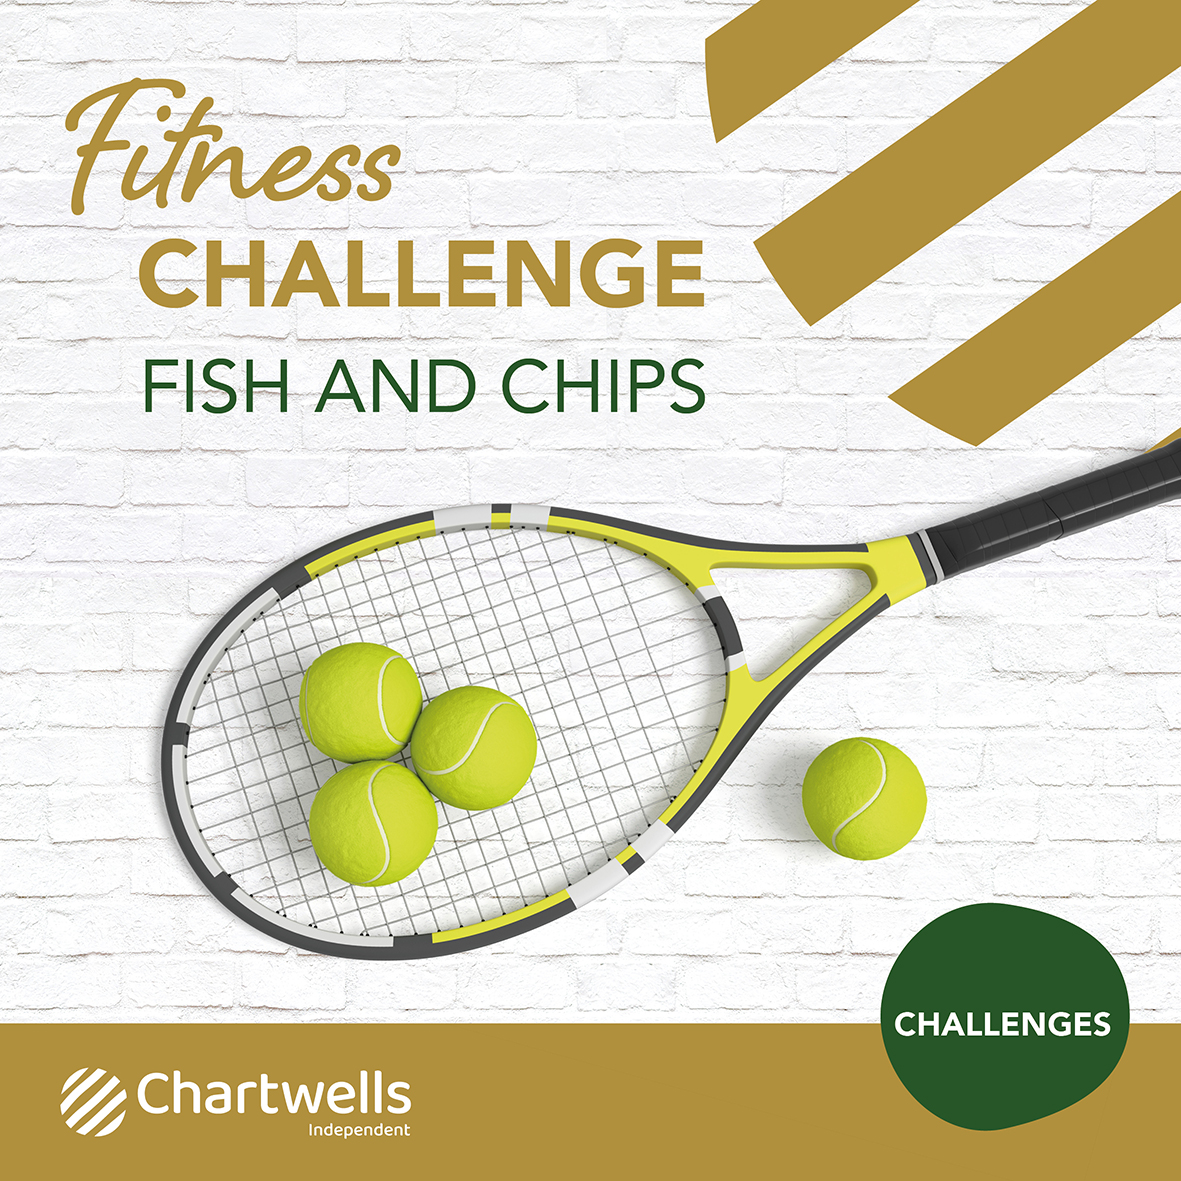 Keep your young people entertained and eco-conscious this summer! Join us for educational activities, physical challenges, and sustainability tips. Let's kick off with our Fish & Chip challenge. Grab a racket and head over to Instagram! #ChartwellsIndependentSummerChallenge